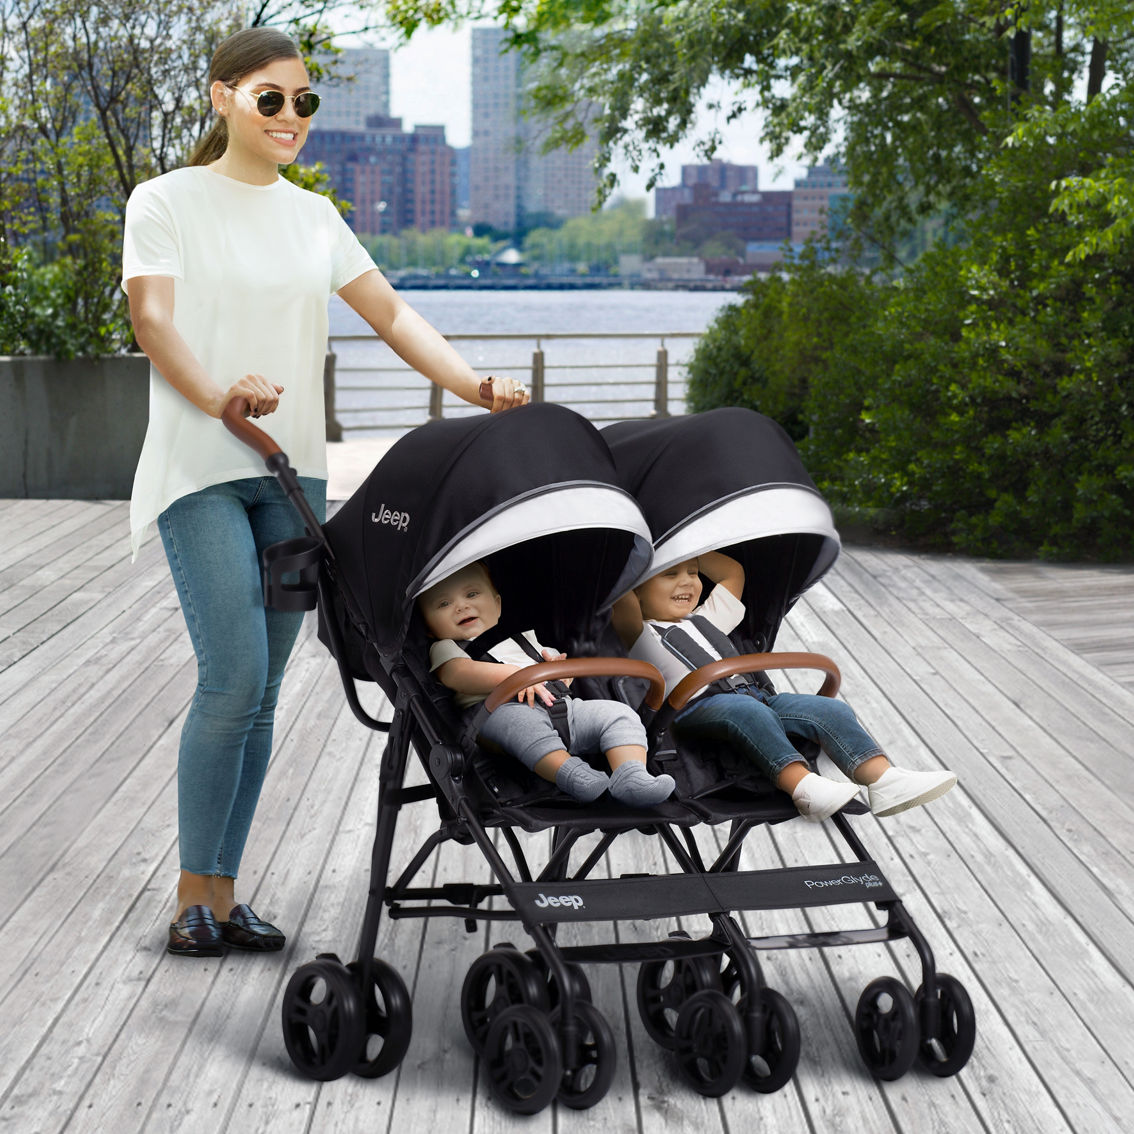 Jeep PowerGlyde Plus Side x Side Double Stroller - Image 7 of 9